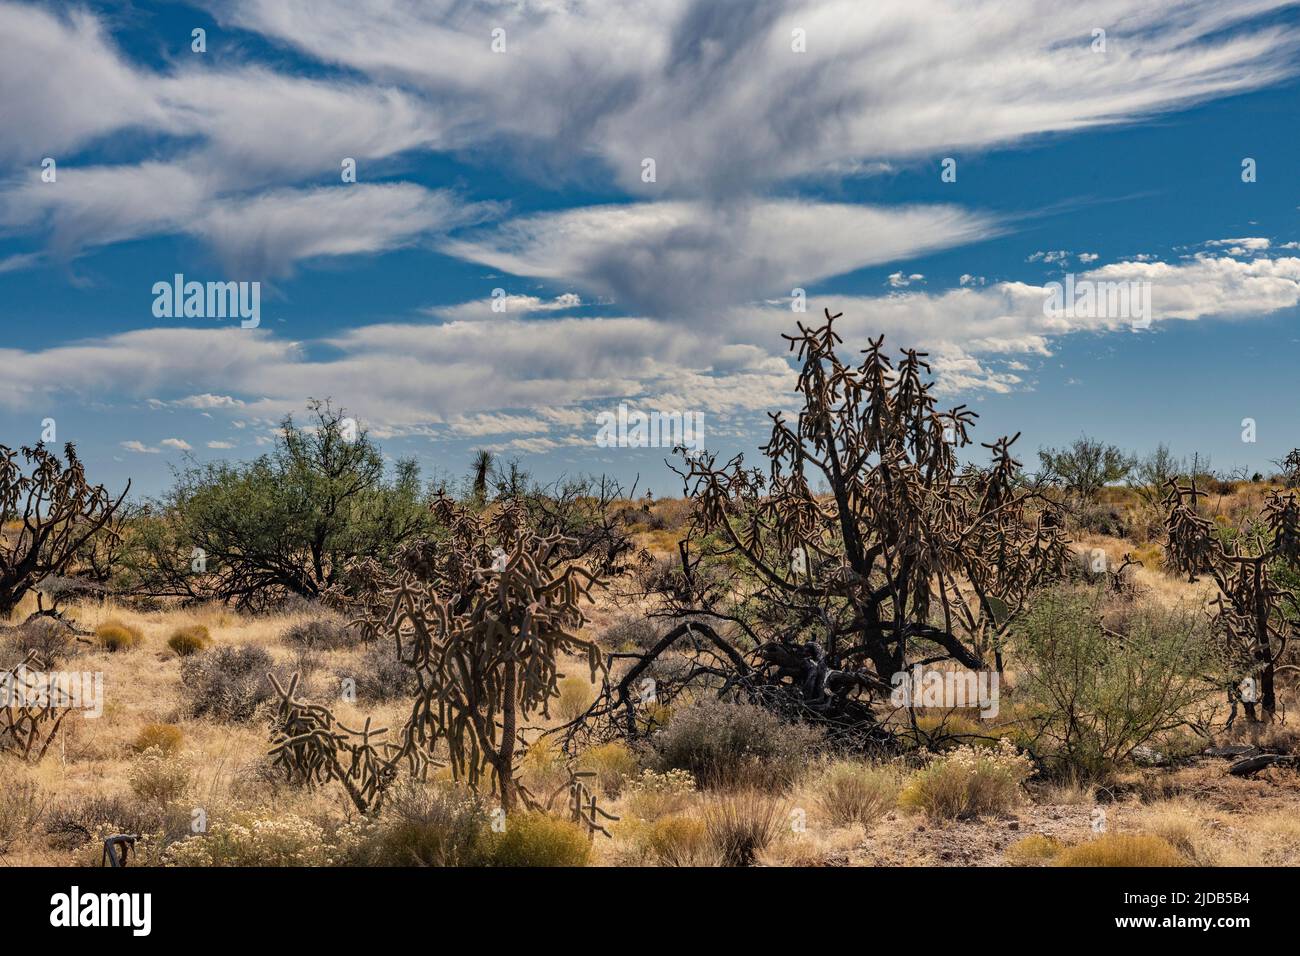 Clouds with trails of precipitation or rainstreaks below the clouds is known as Virga over the dry Arizona landscape and Cholla Cactus.  The moistu... Stock Photo